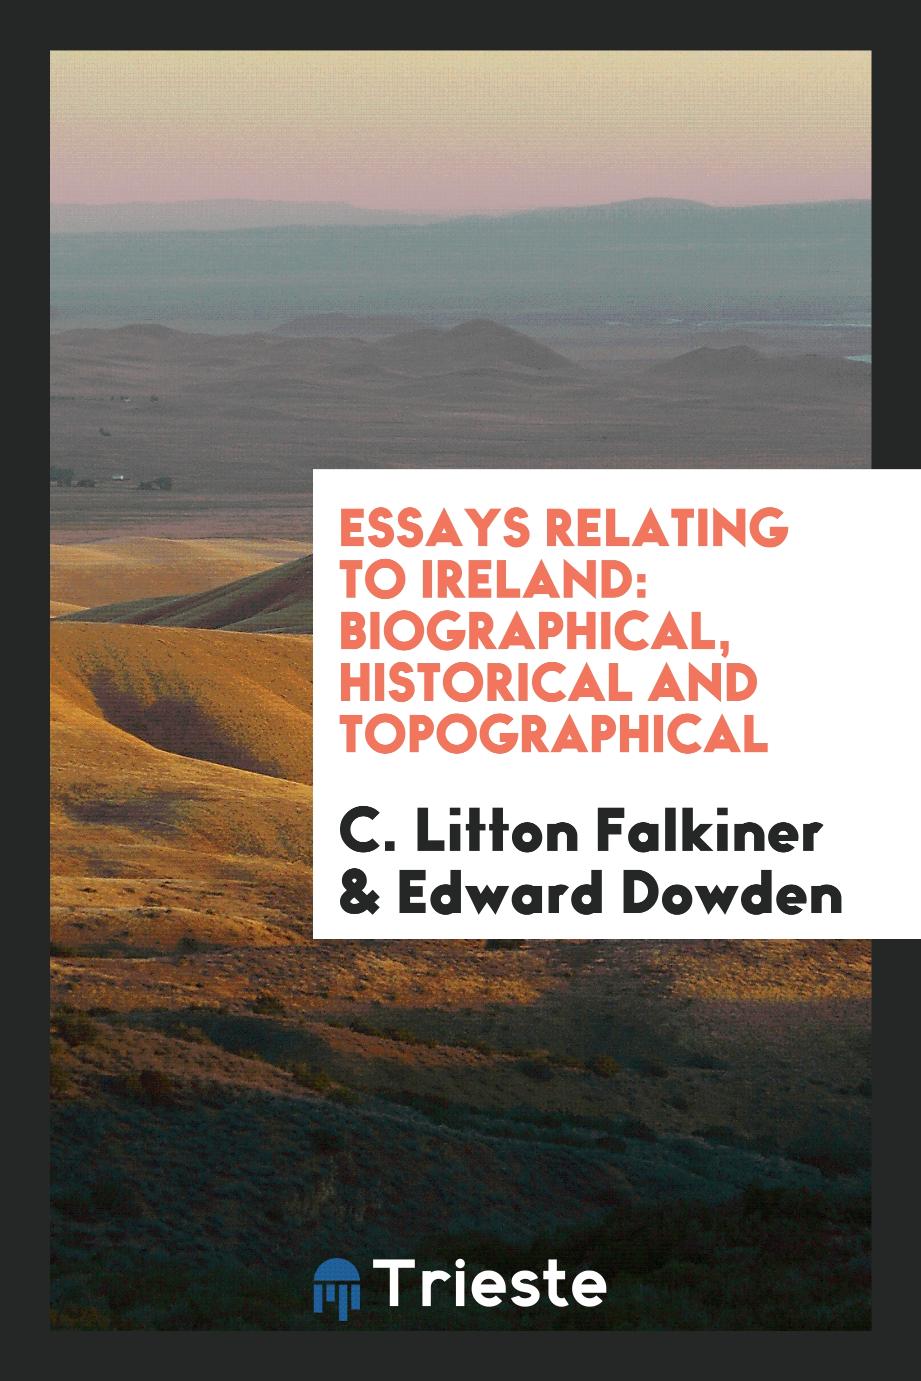 Essays relating to Ireland: biographical, historical and topographical